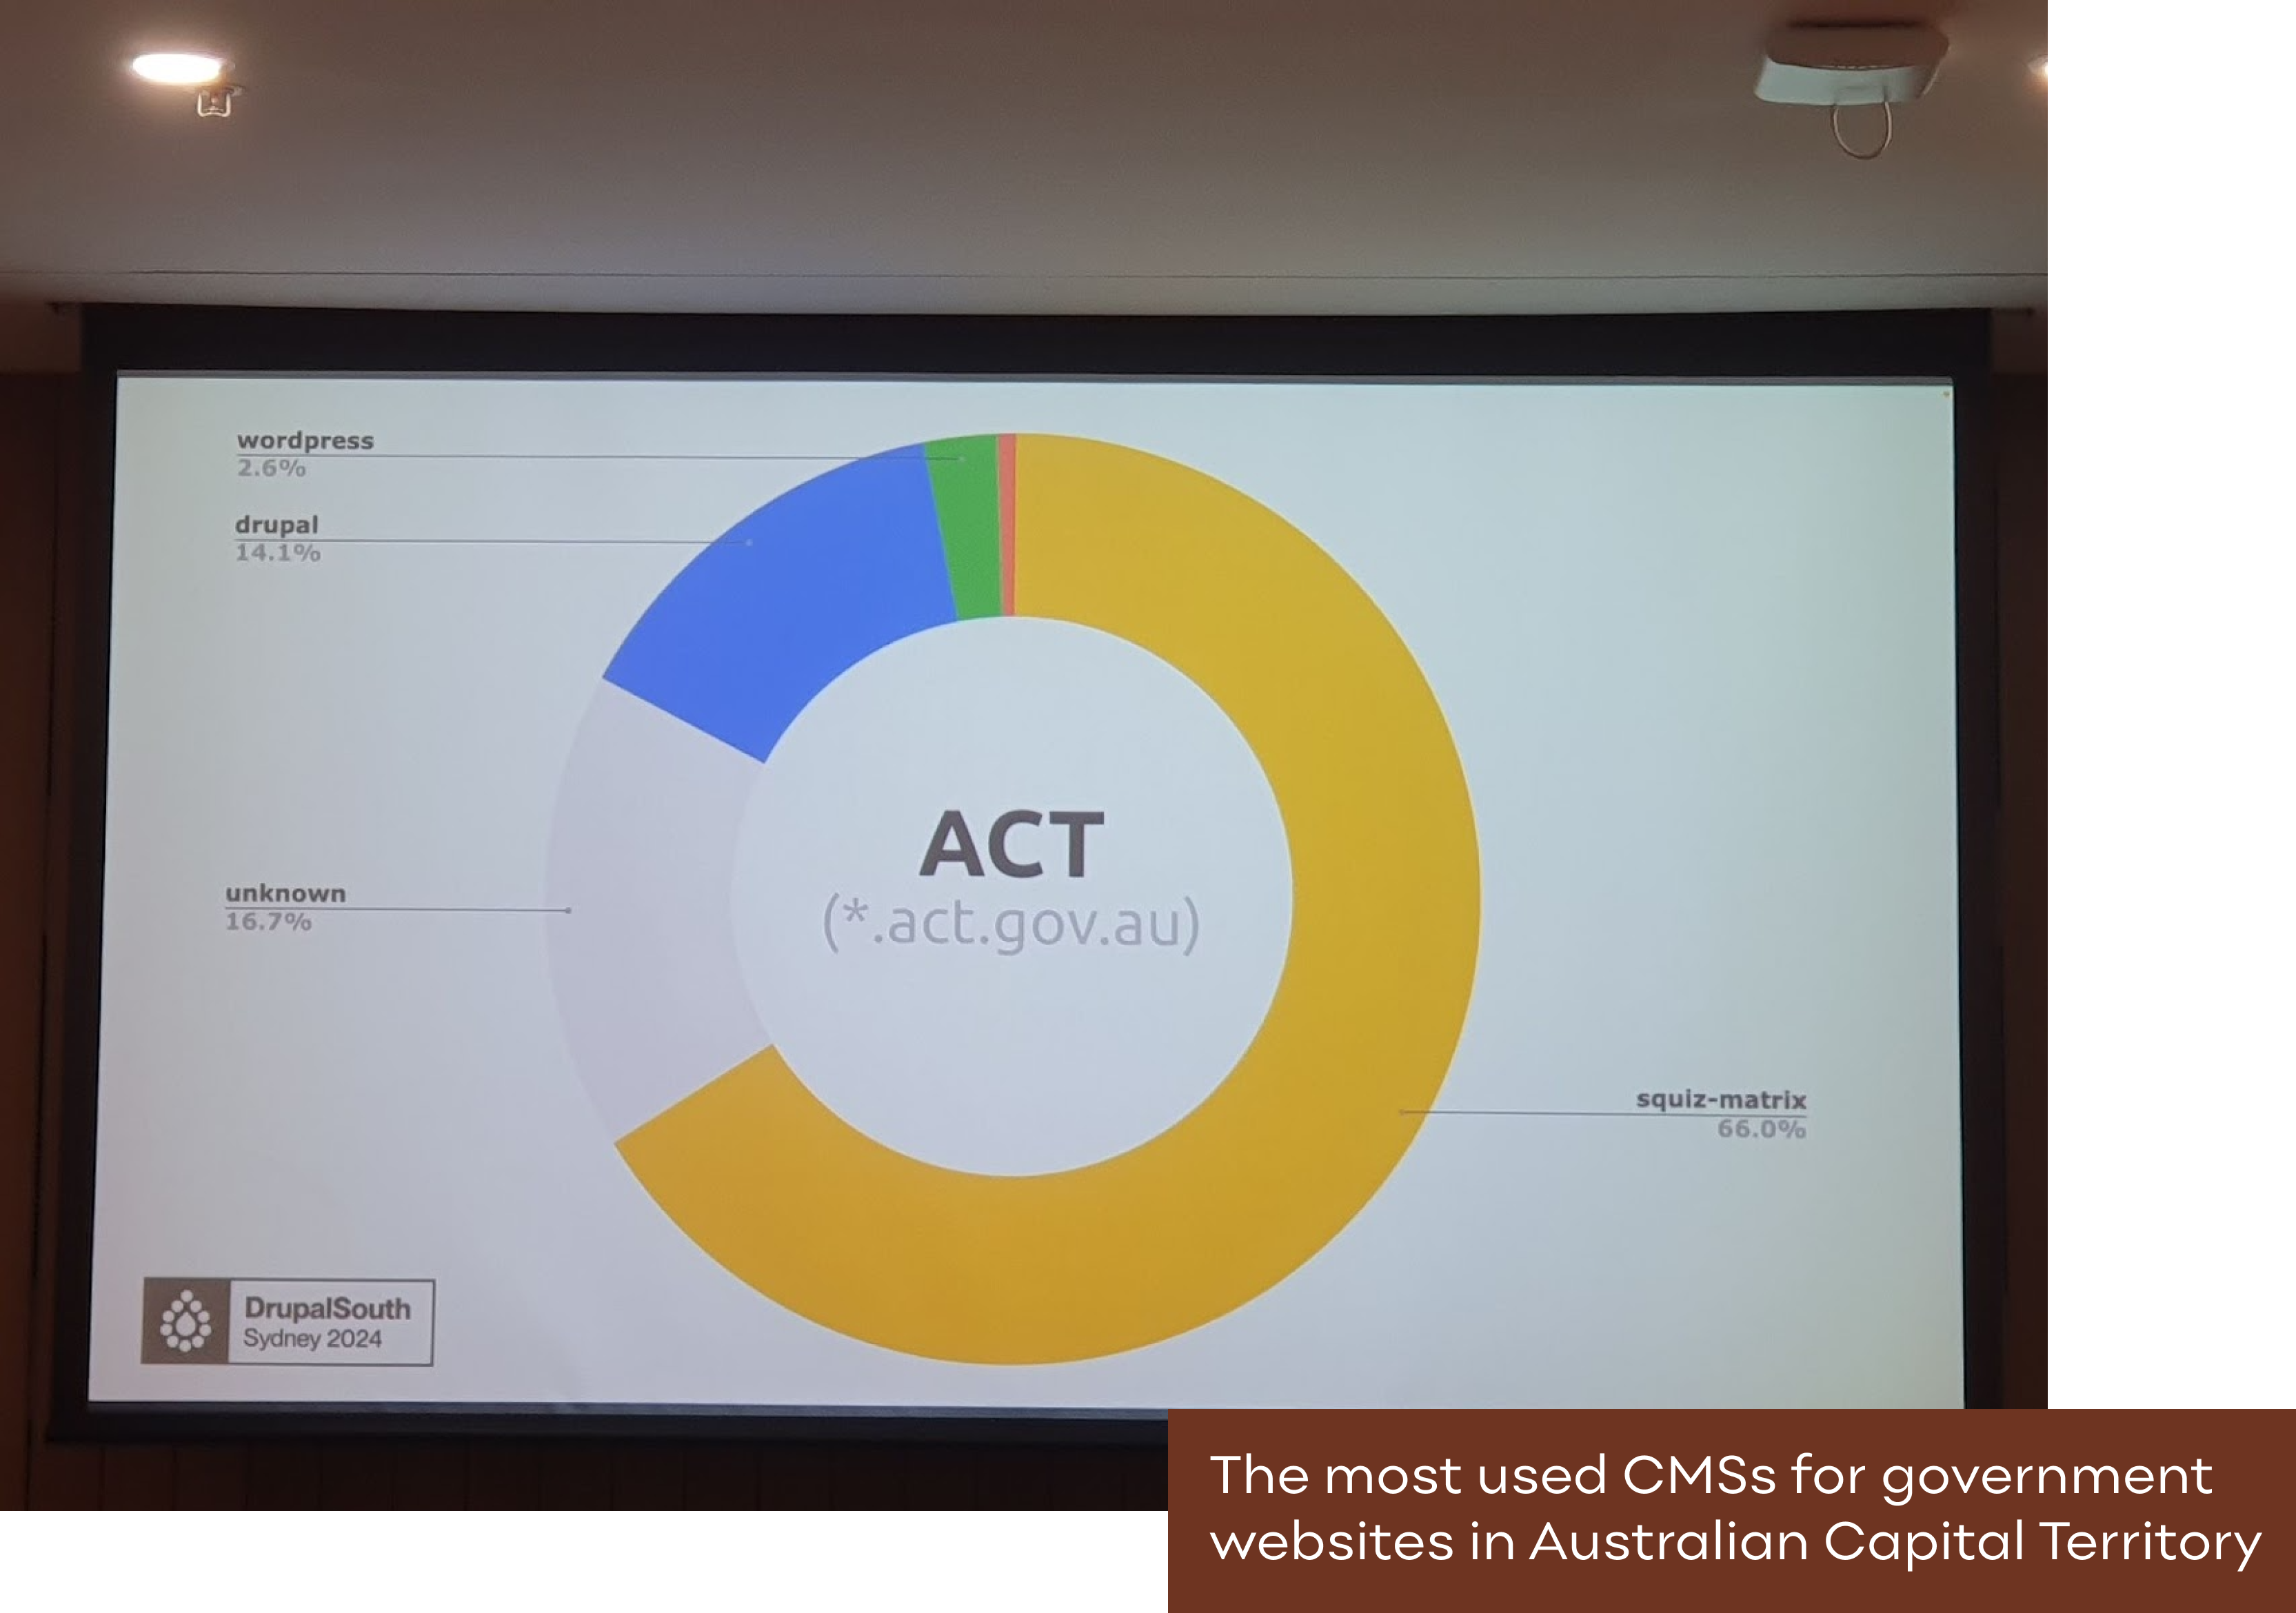 The most used CMSs by the government in ACT